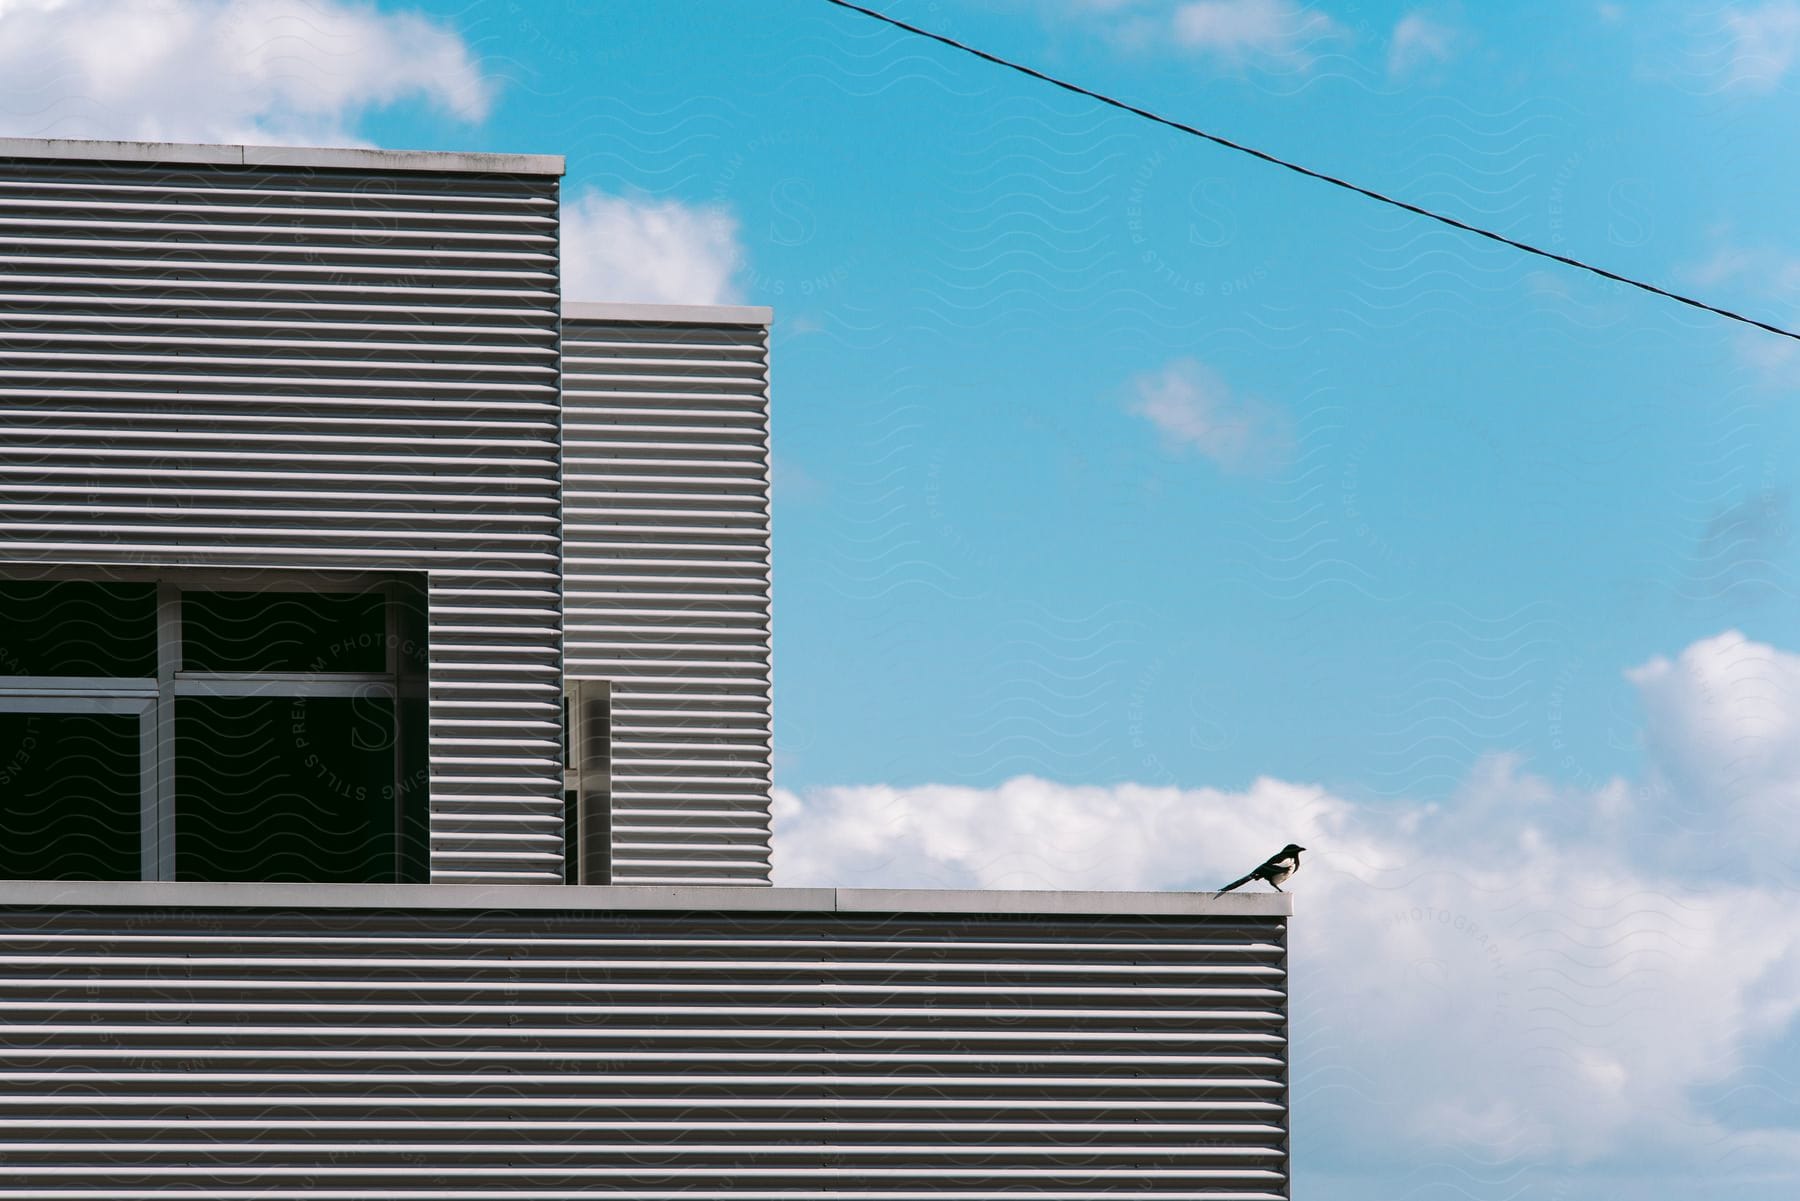 A bird is perched on the edge of a building.